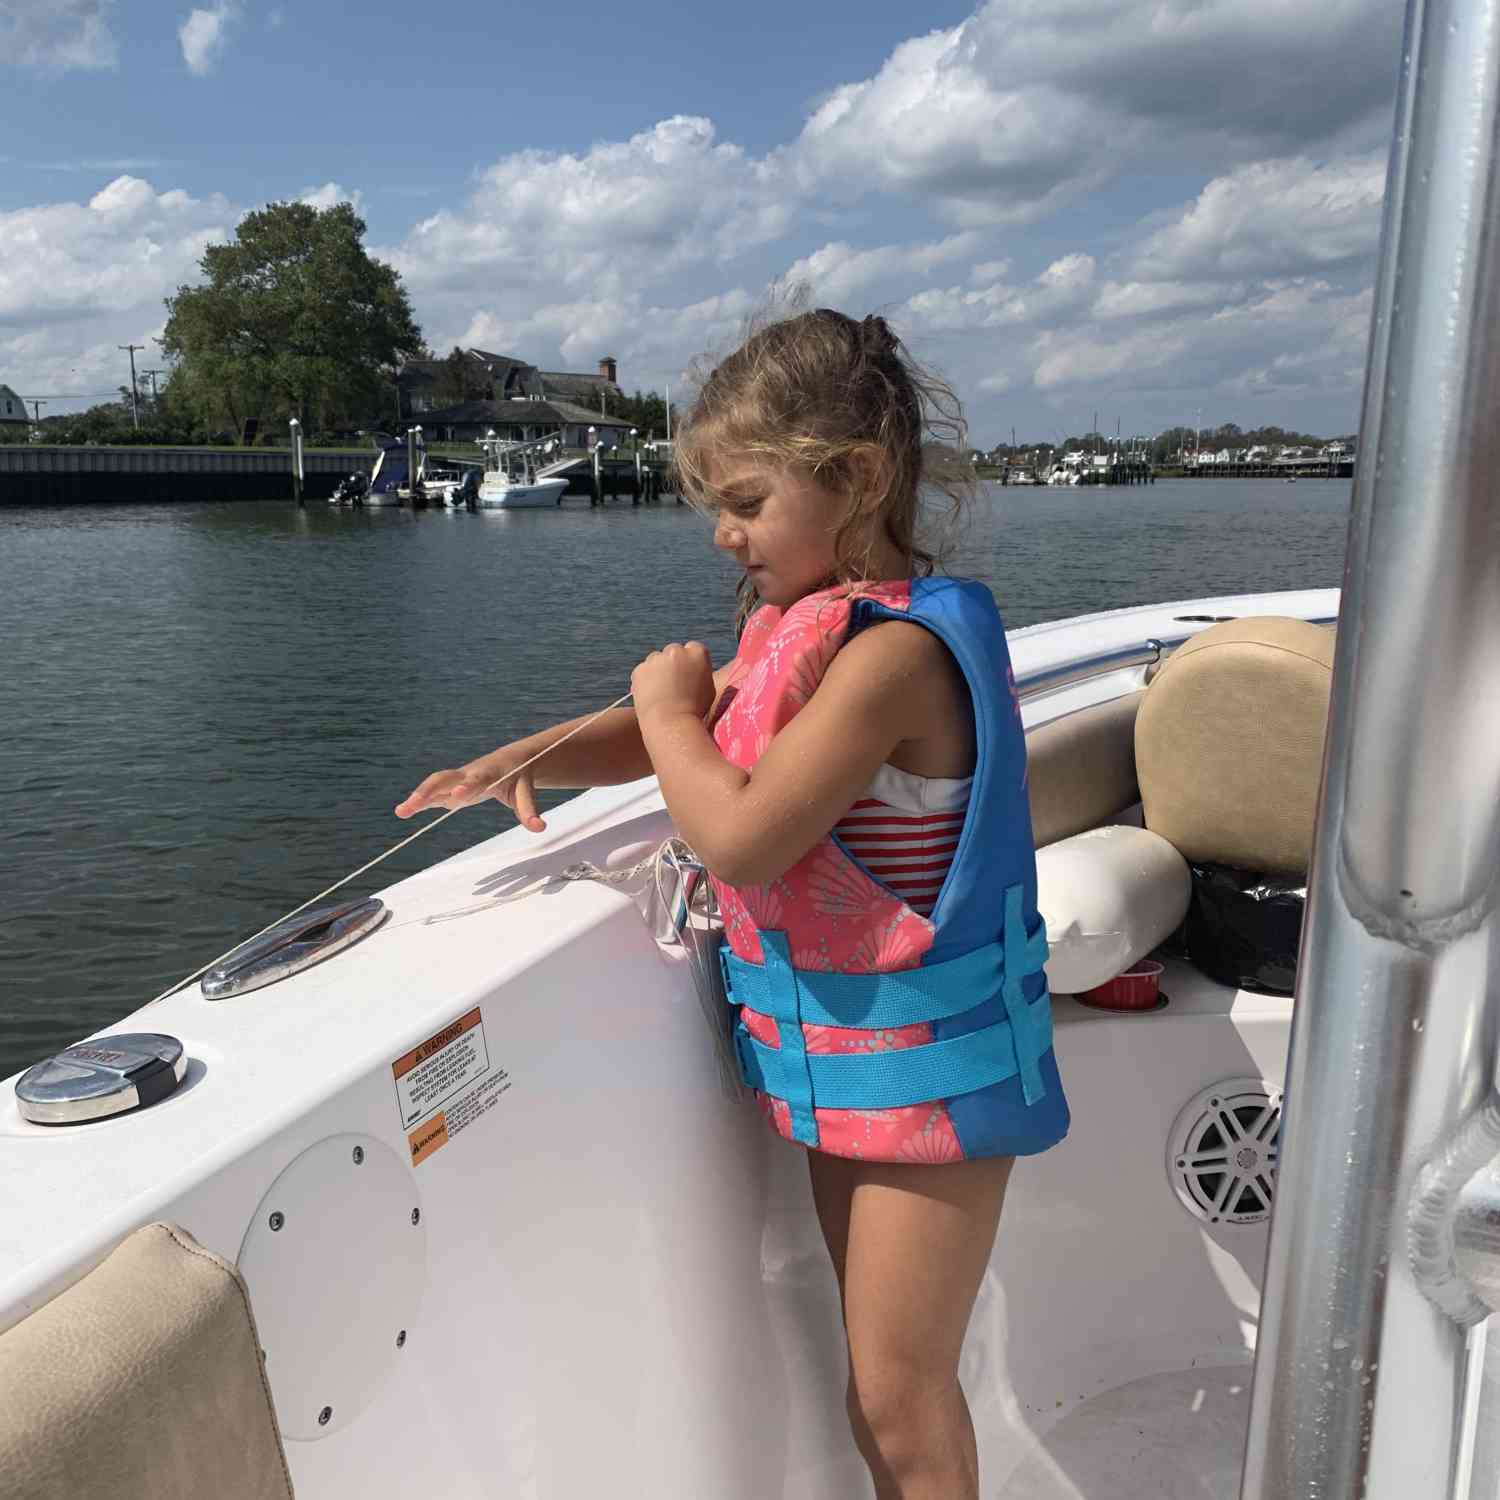 Title: Roll Tide on the Low Tide - On board their Sportsman Open 212 Center Console - Location: Manasquan, NJ. Participating in the Photo Contest #SportsmanMarch2021